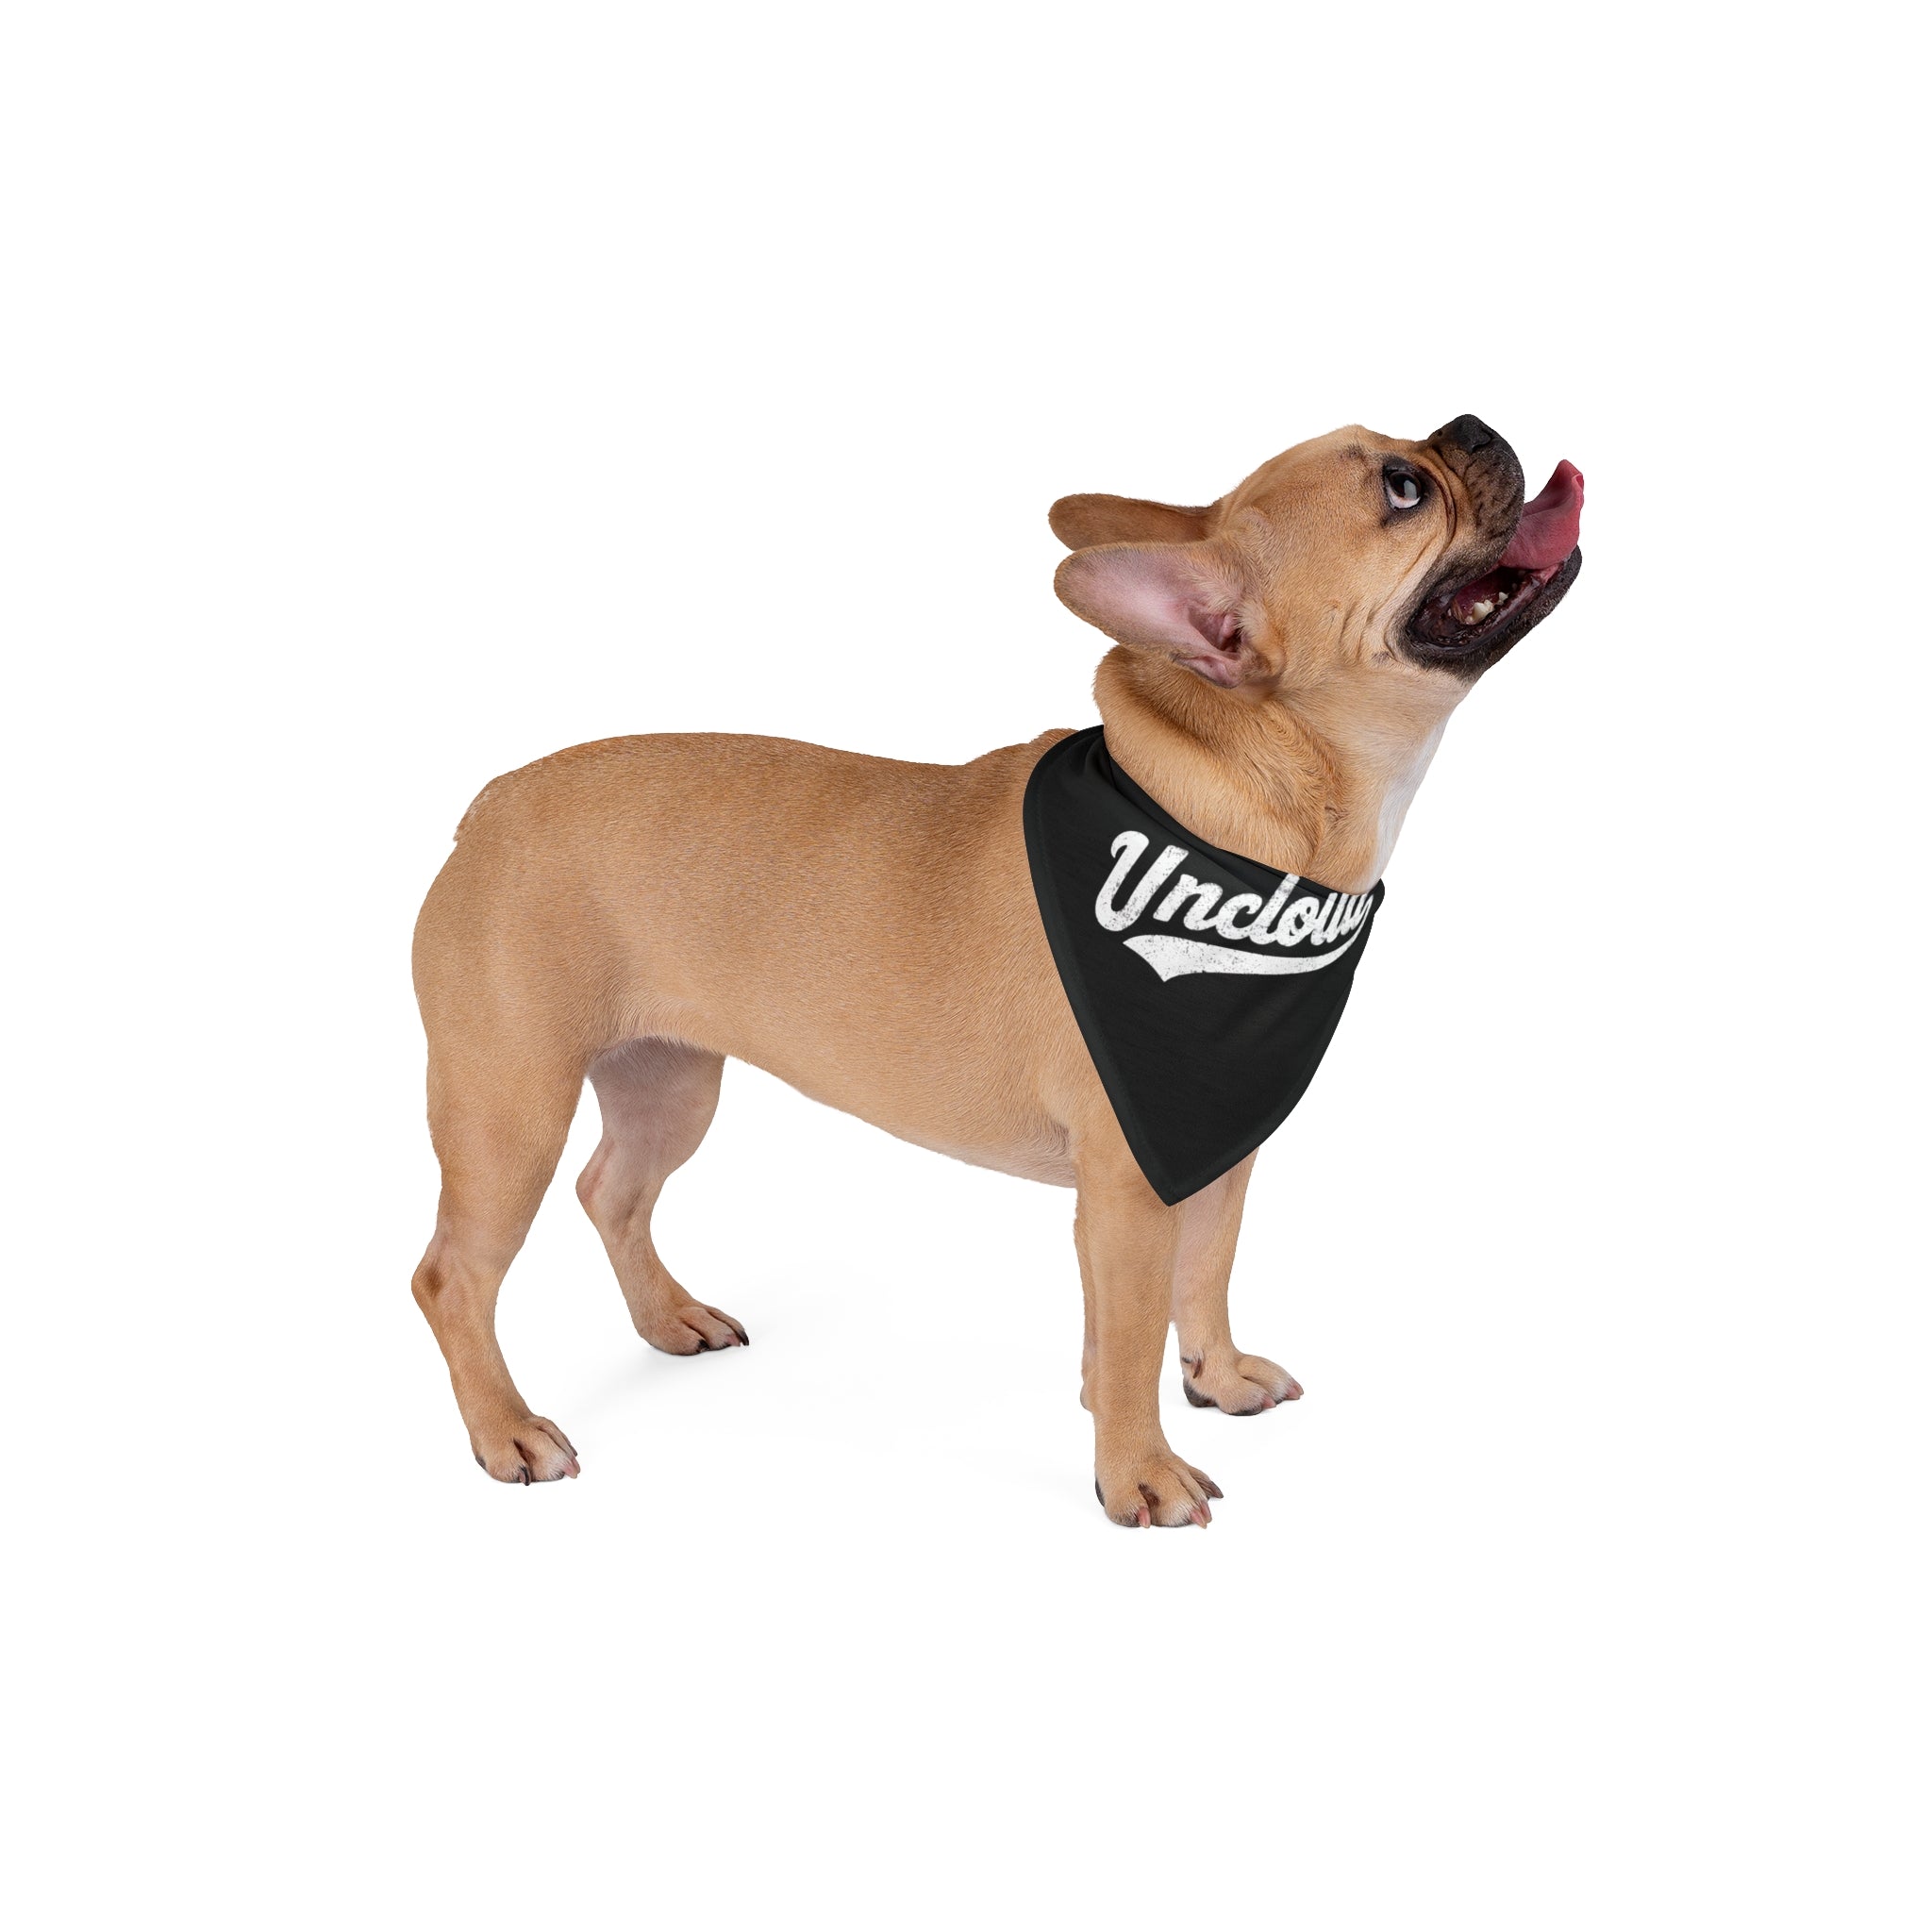 A light brown French Bulldog wearing a black bandana made from soft-spun polyester with "Uncloud - Pet Bandana" written on it stands on a white background, looking upwards.